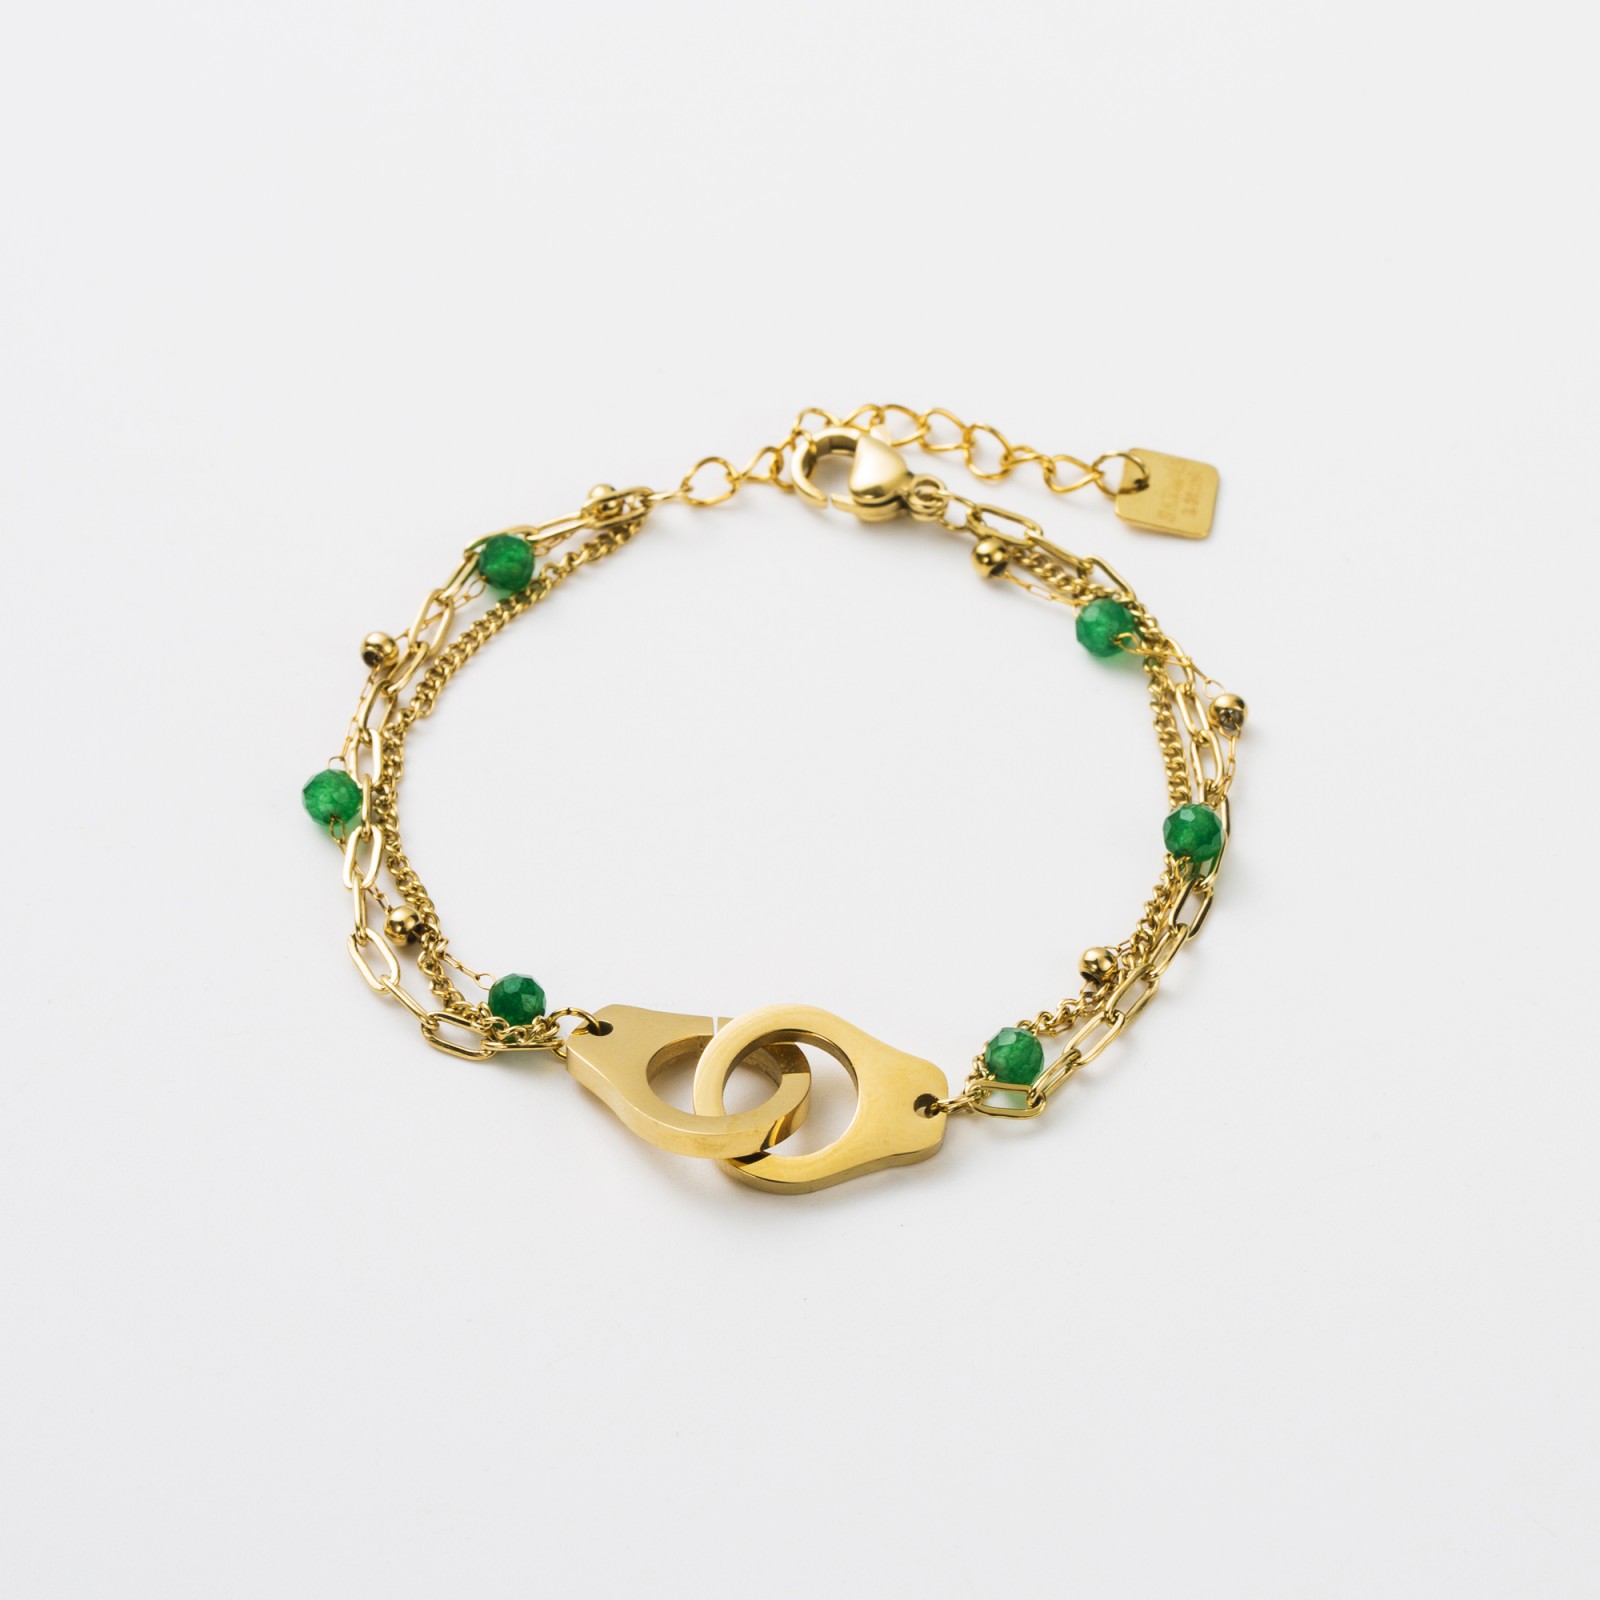 Multirow Stone and Handcuffs Bracelet Stone:Green Agate